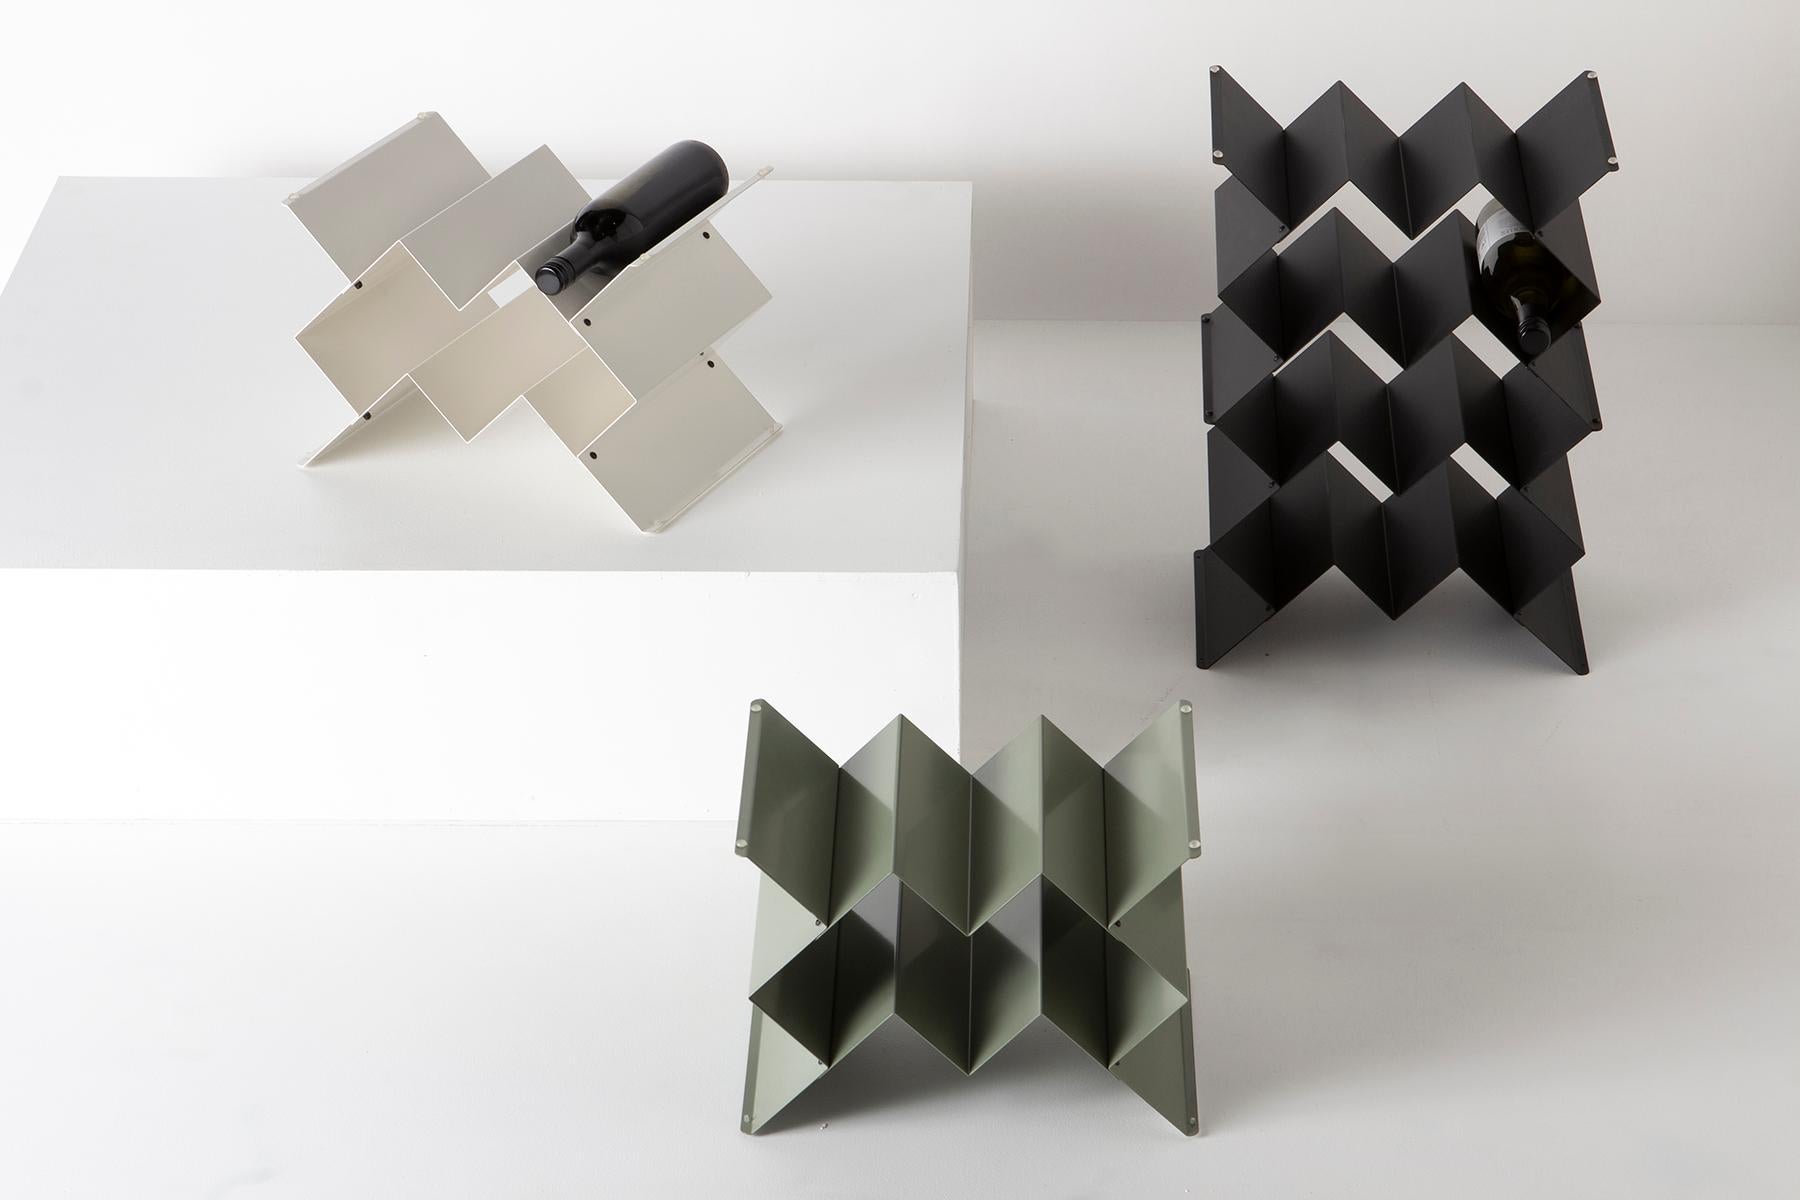 Fold wine rack is a Brutalist inspired modular design that can be stacked in a variety of sizes and configurations. Made from folded sheet metal with a powder-coated finish. The intention of the Fold collection is to express the purity of